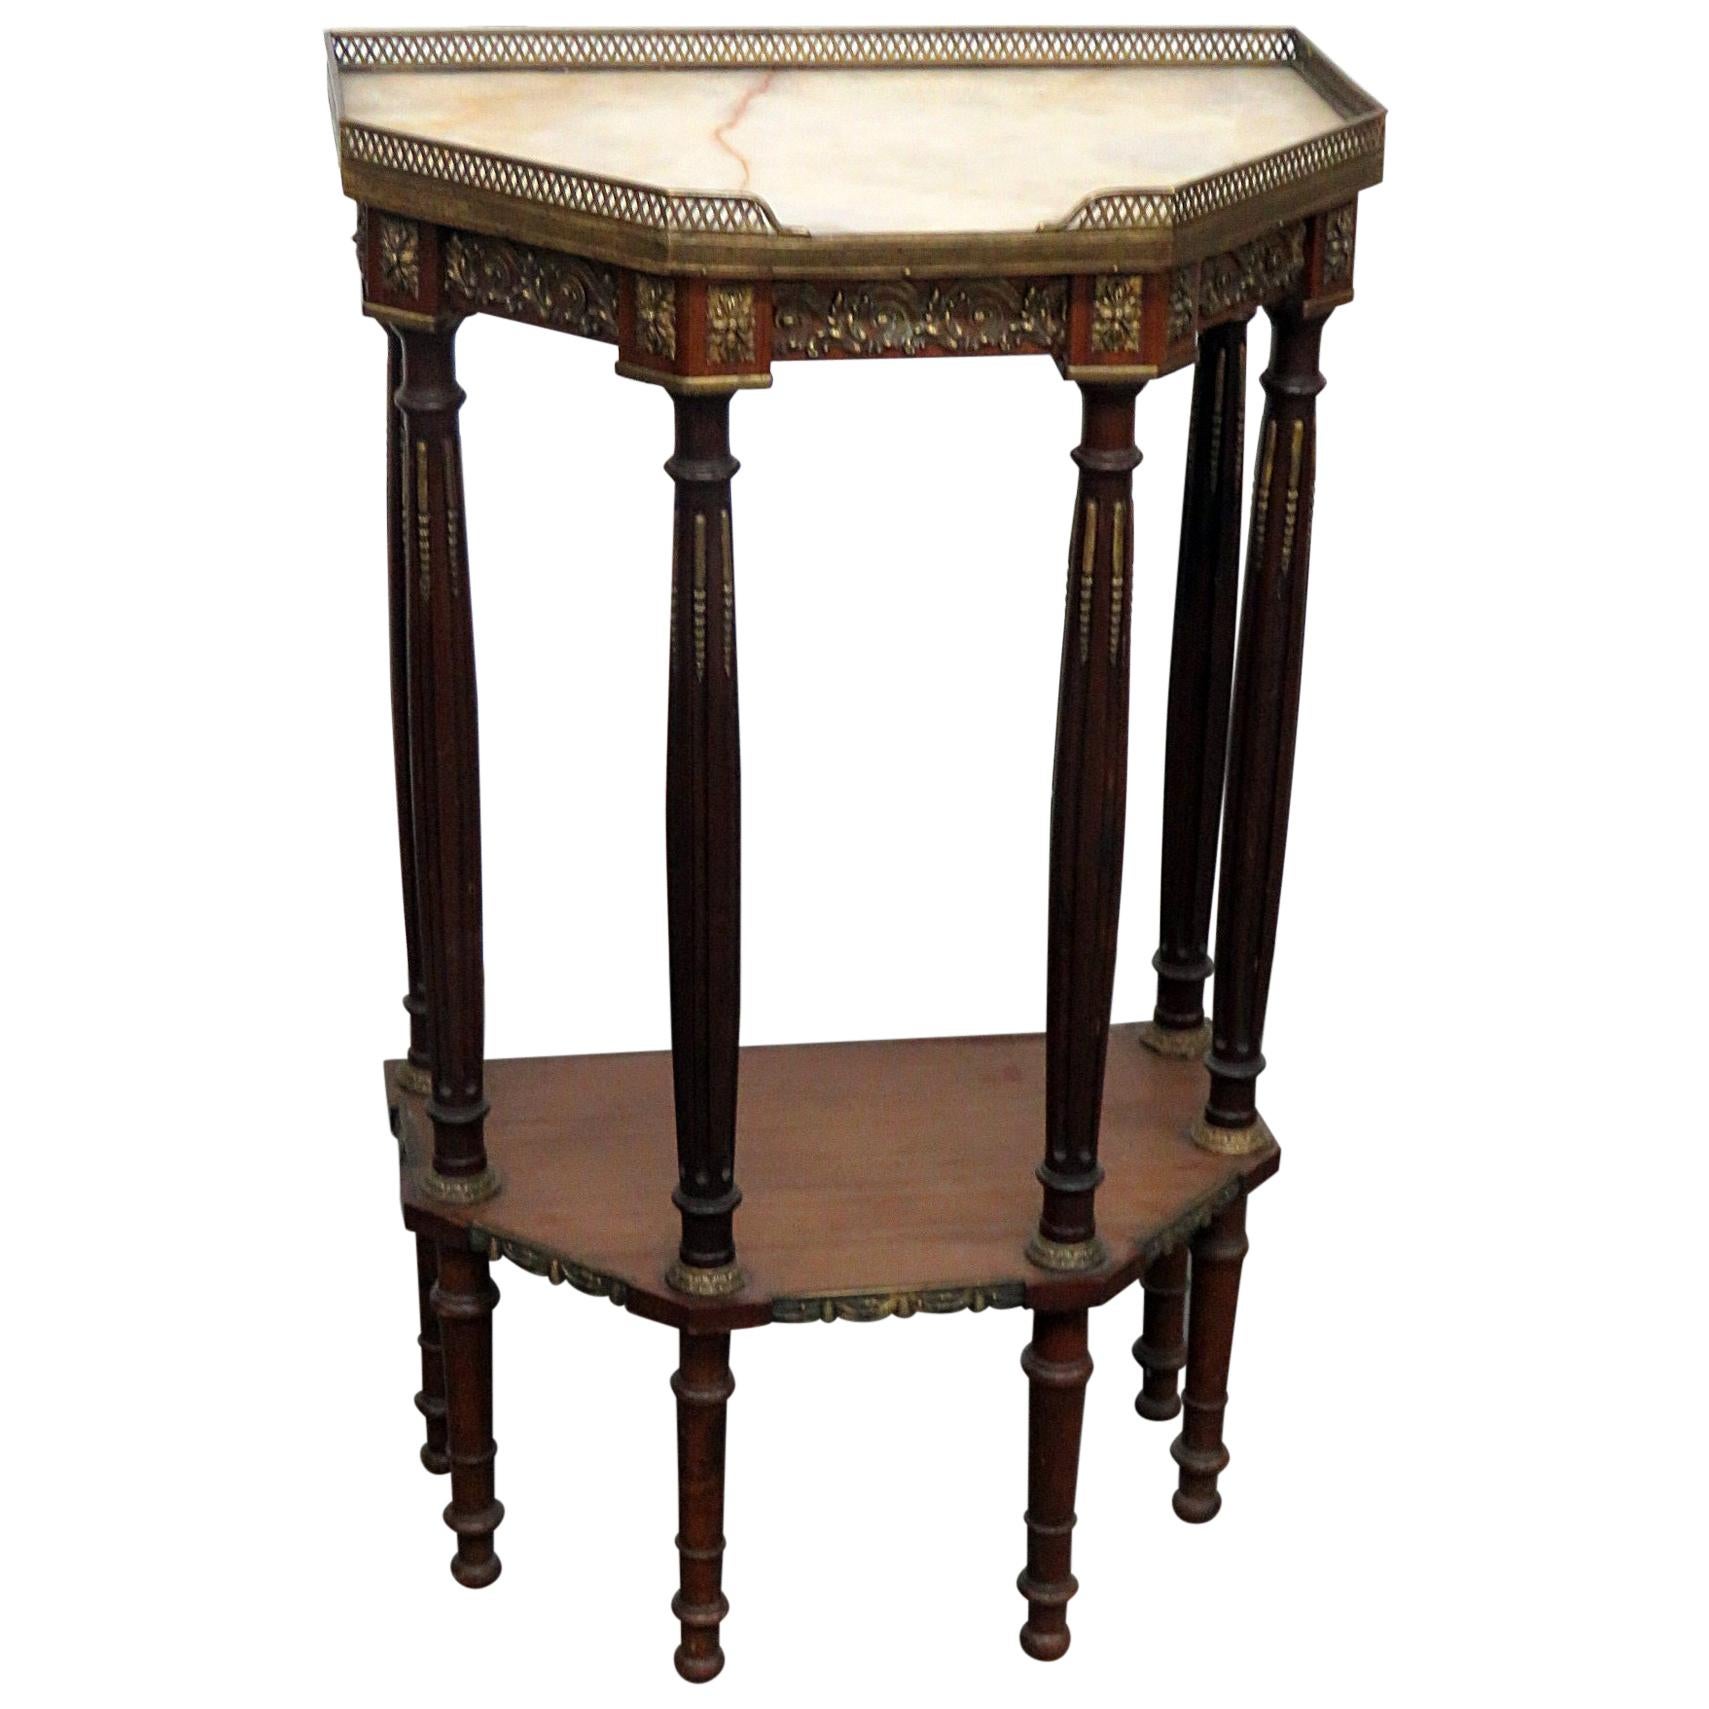 Regency Style Marble-Top Hall Table